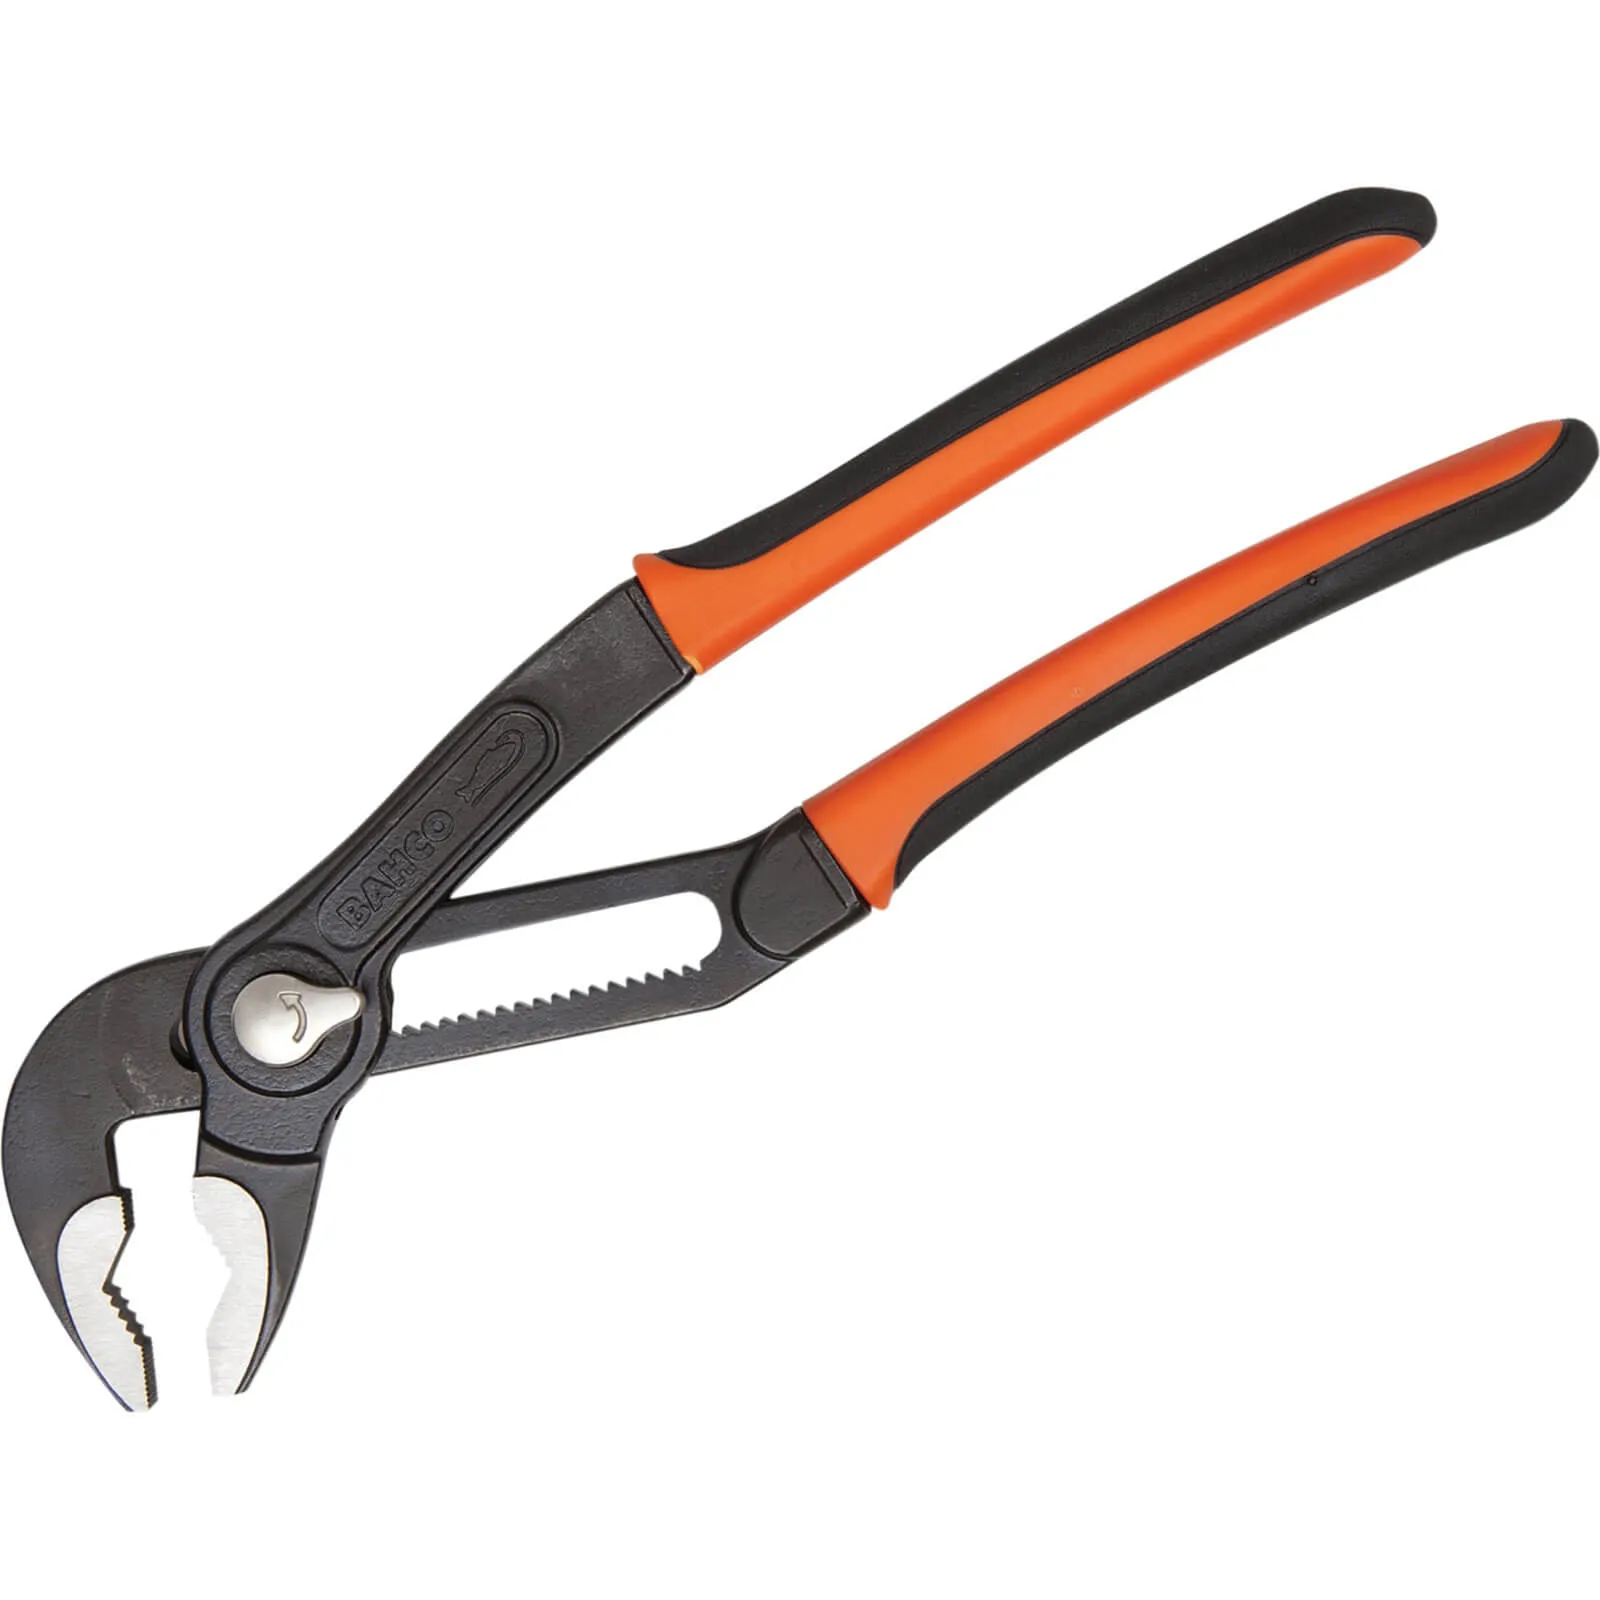 Bahco 7223 Quick Adjust Slip Joint Pliers - 250mm